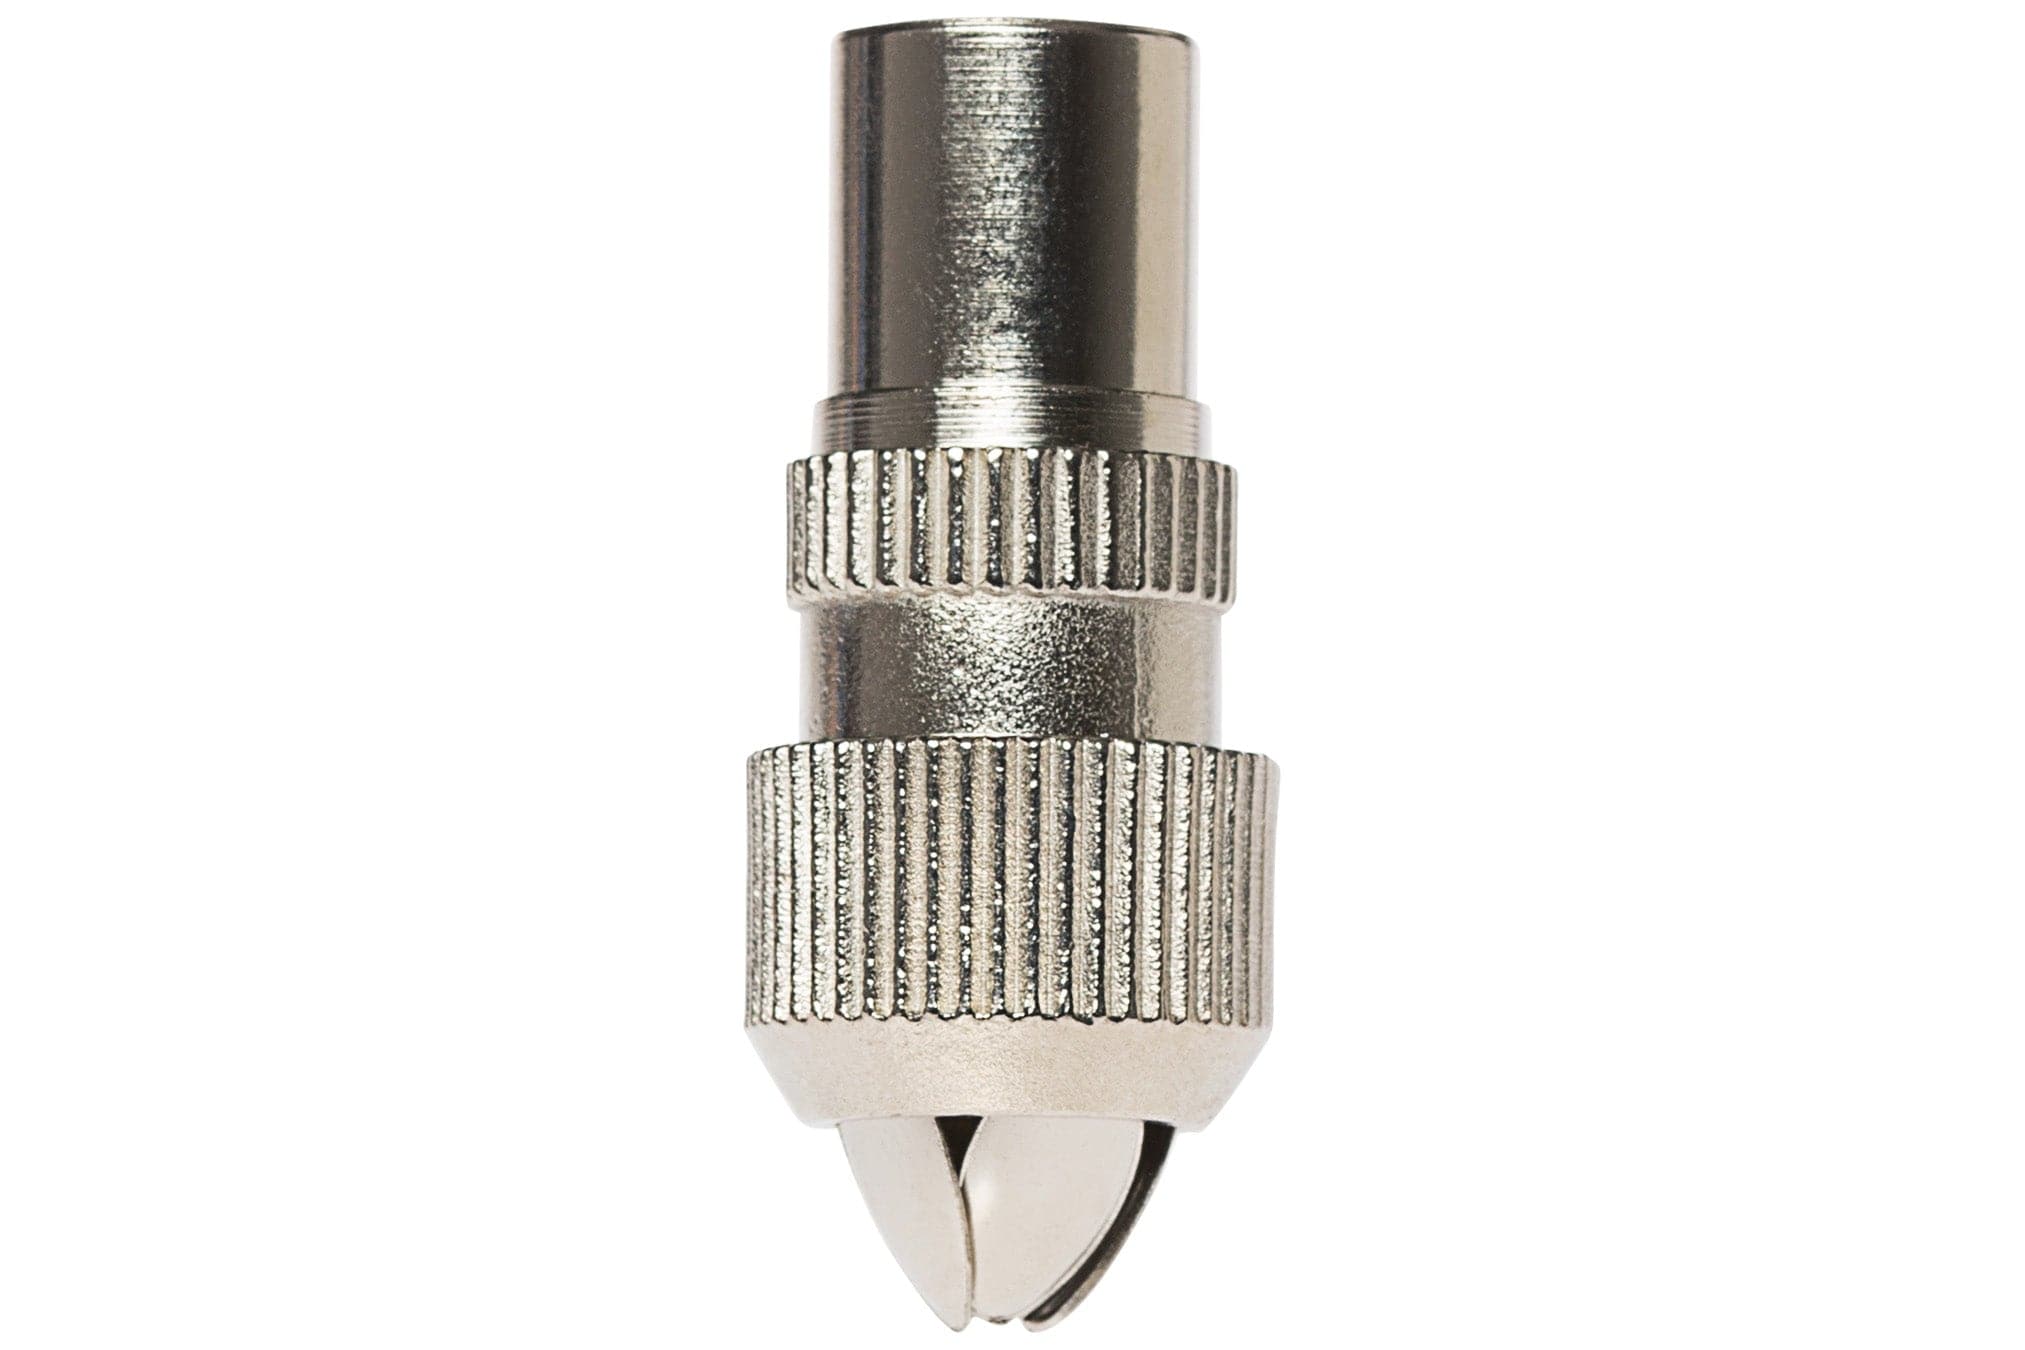 Maplin RF Type Male Plug Connector for TV Aerial Coaxial Cable